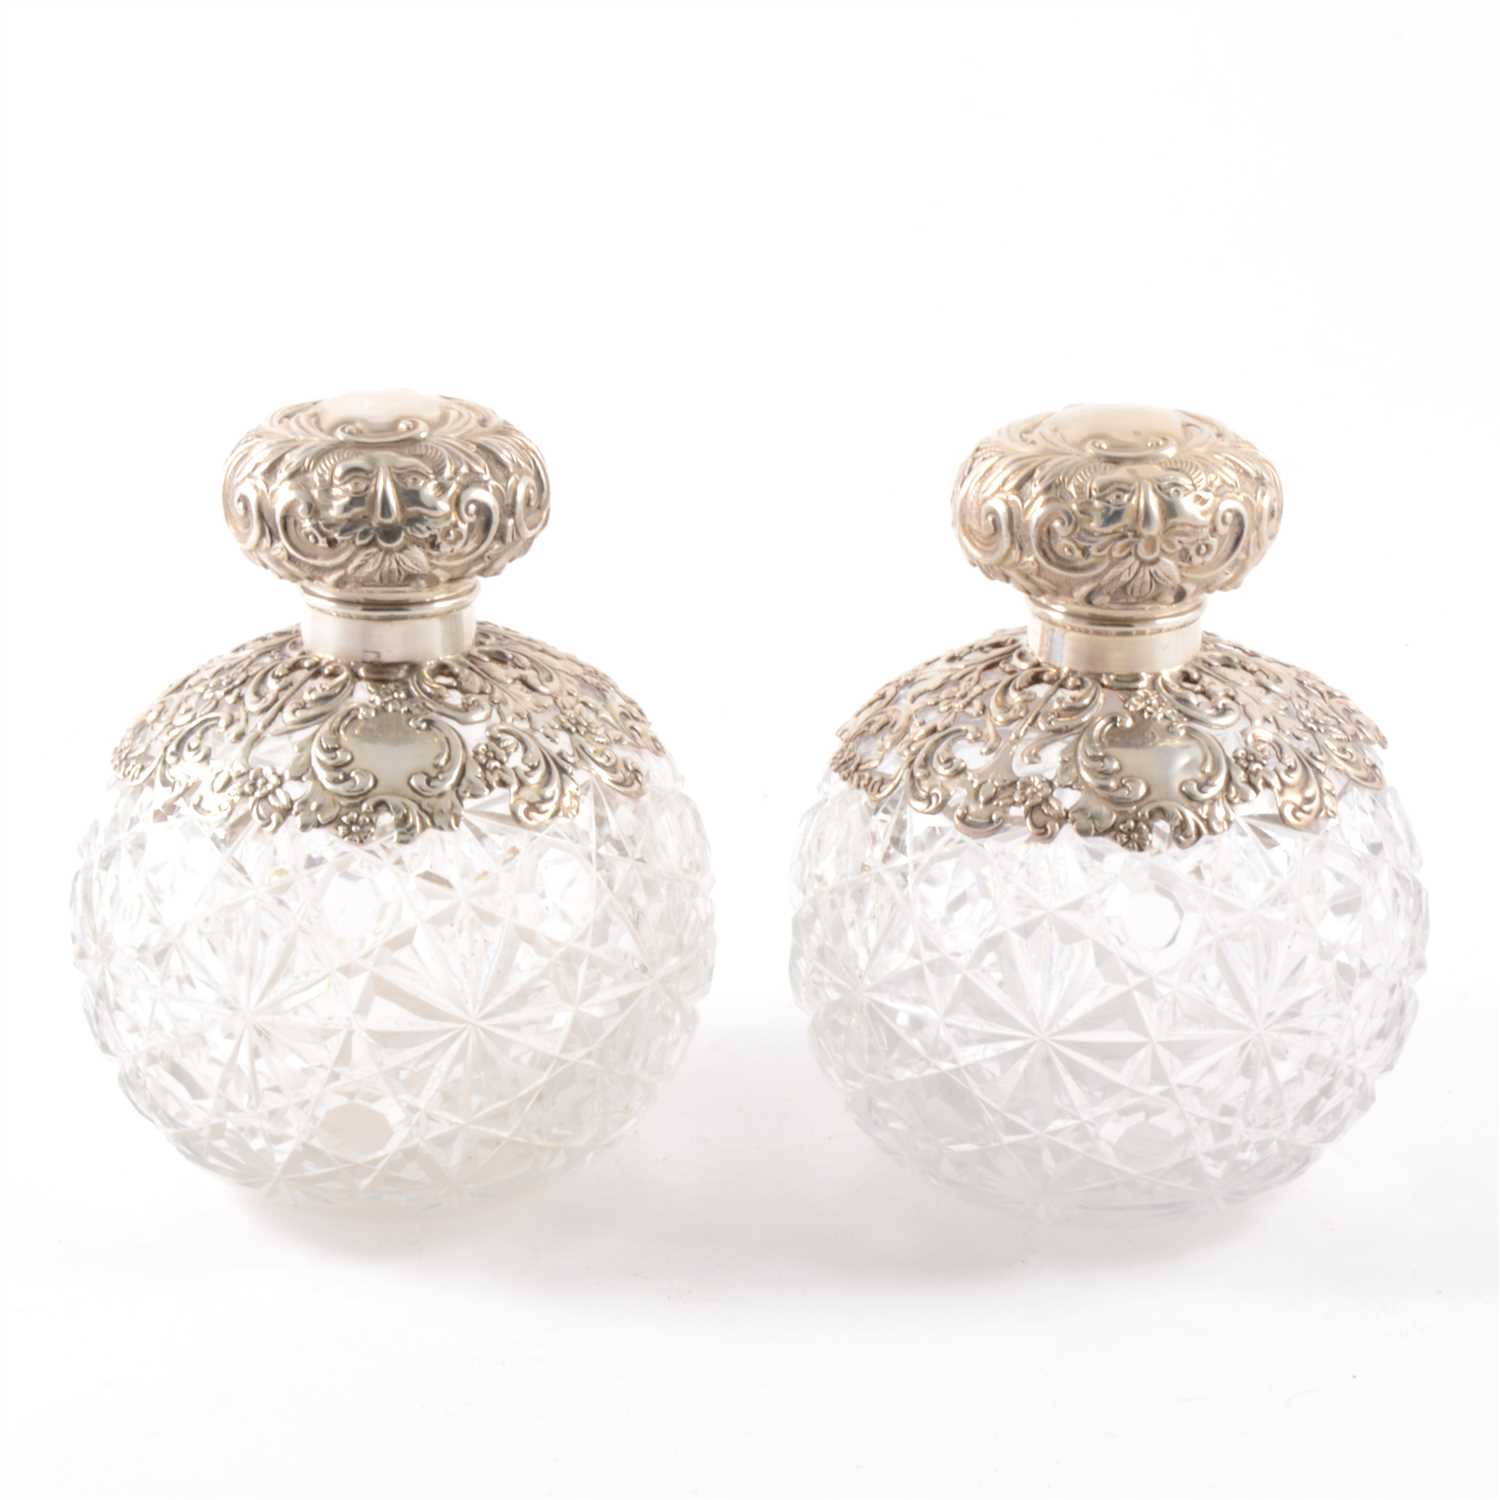 Lot 109 - Pair of Edwardian silver mounted cut glass scent bottles, probably William Neale, Chester 1903